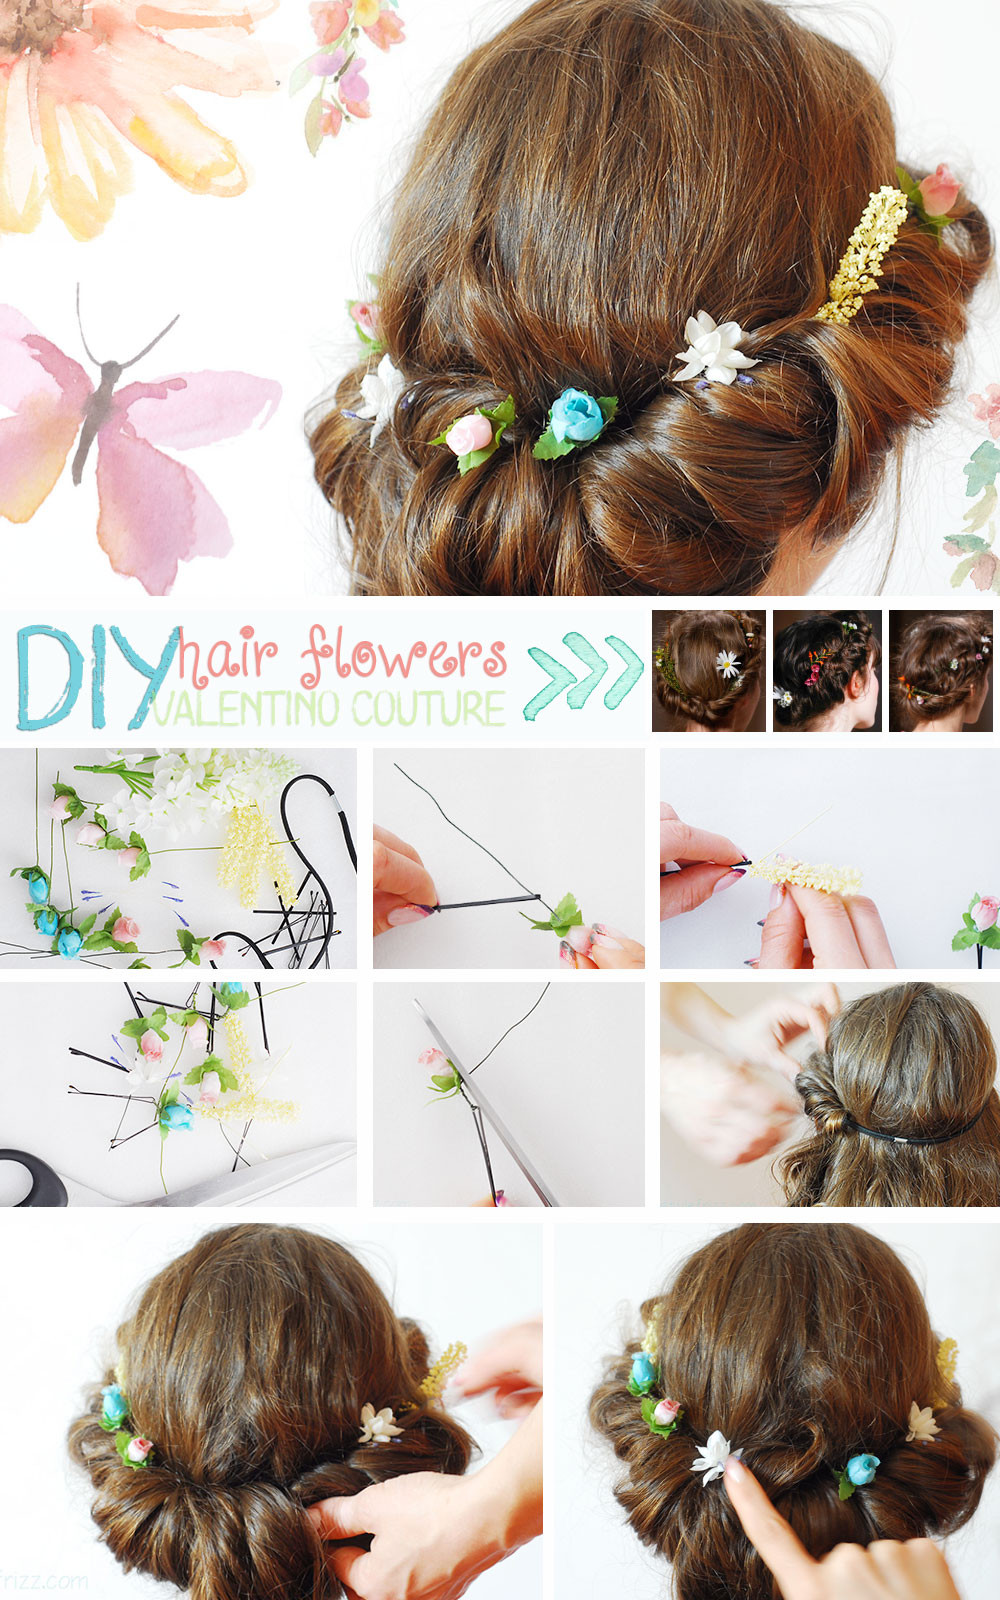 DIY Hair Accessories
 DIY Flowers Hair Accessories Inspired By Valentino Haute